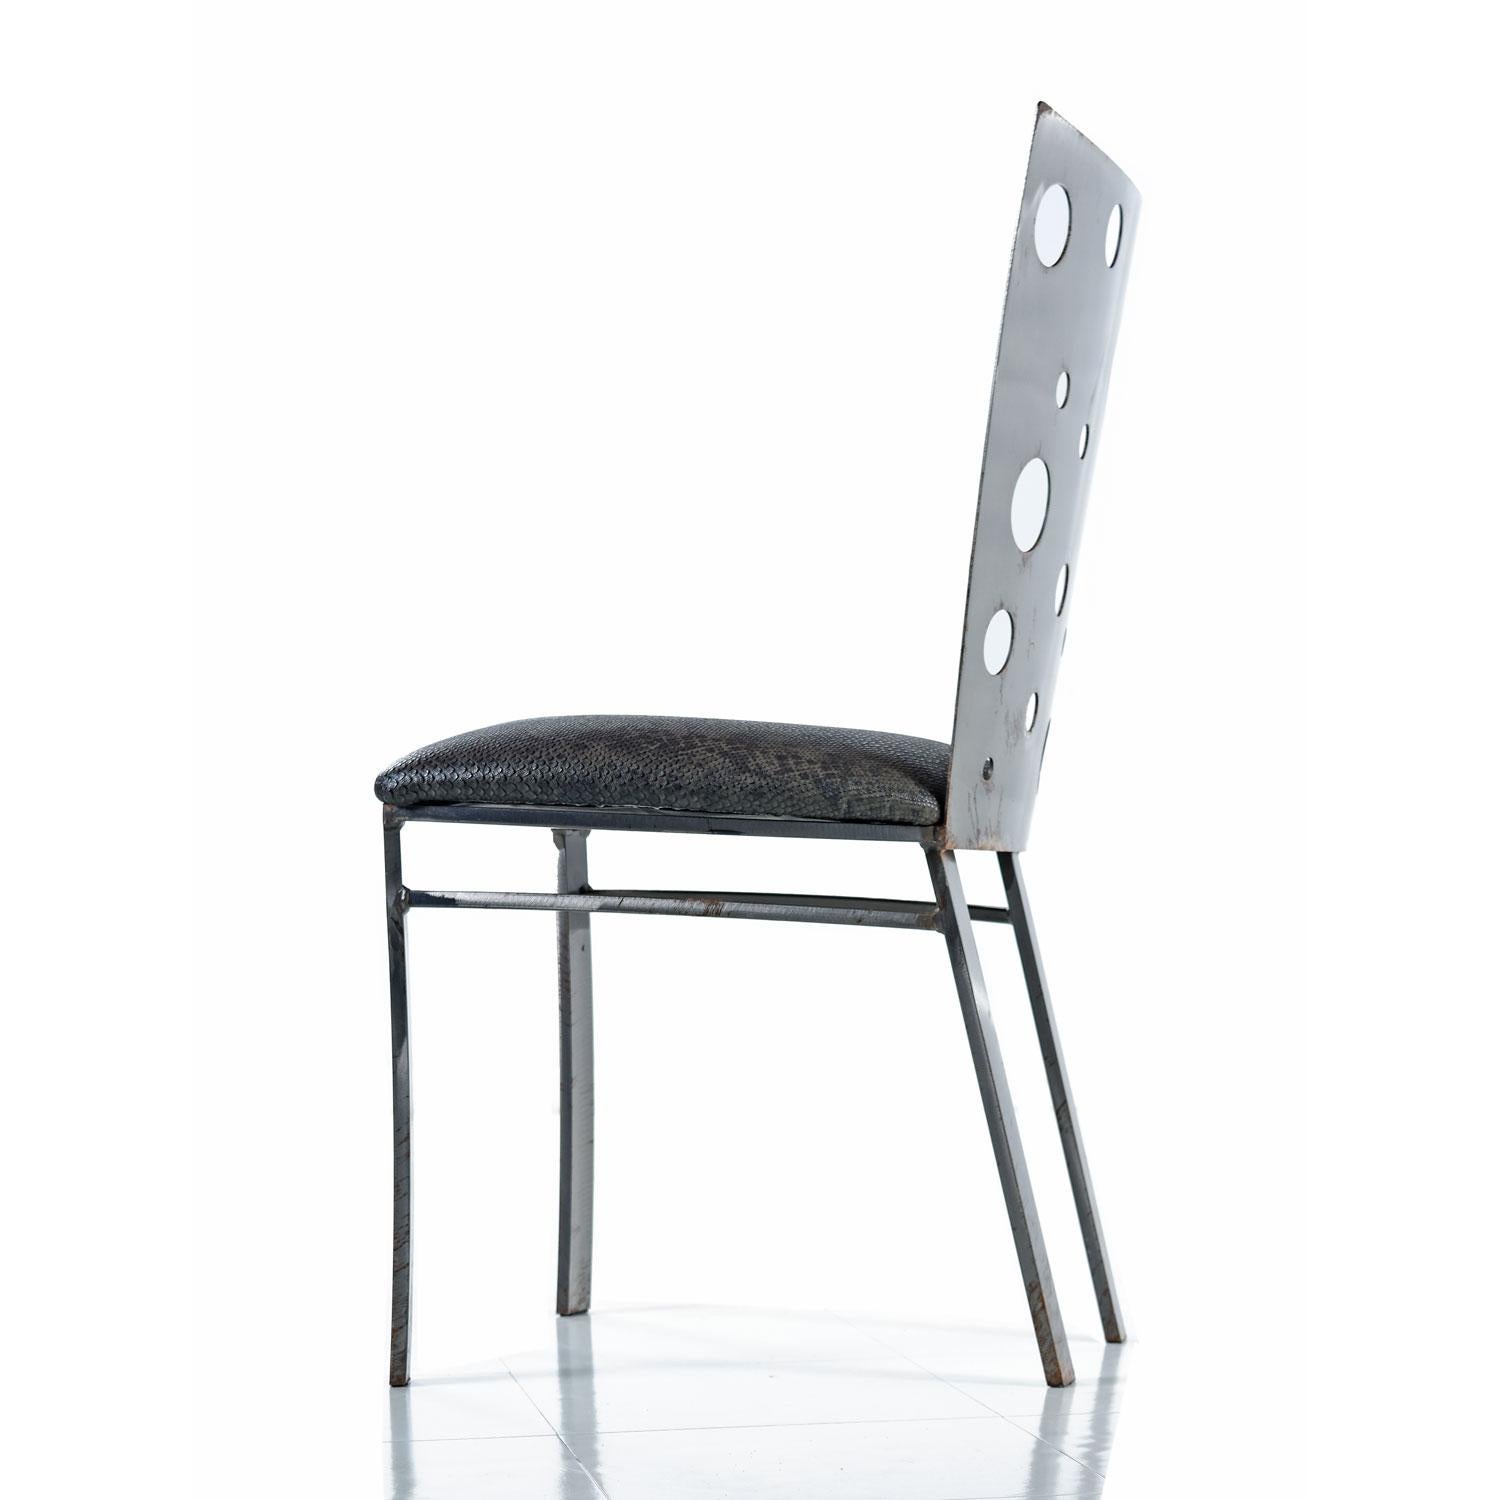 This set of four dining chairs by Johnston Casuals are uniquely crafted of solid steel! The back rests feature a novel decorative pattern of various size circles. The angular design, choice of materials and whimsical pattern seem to blend elements